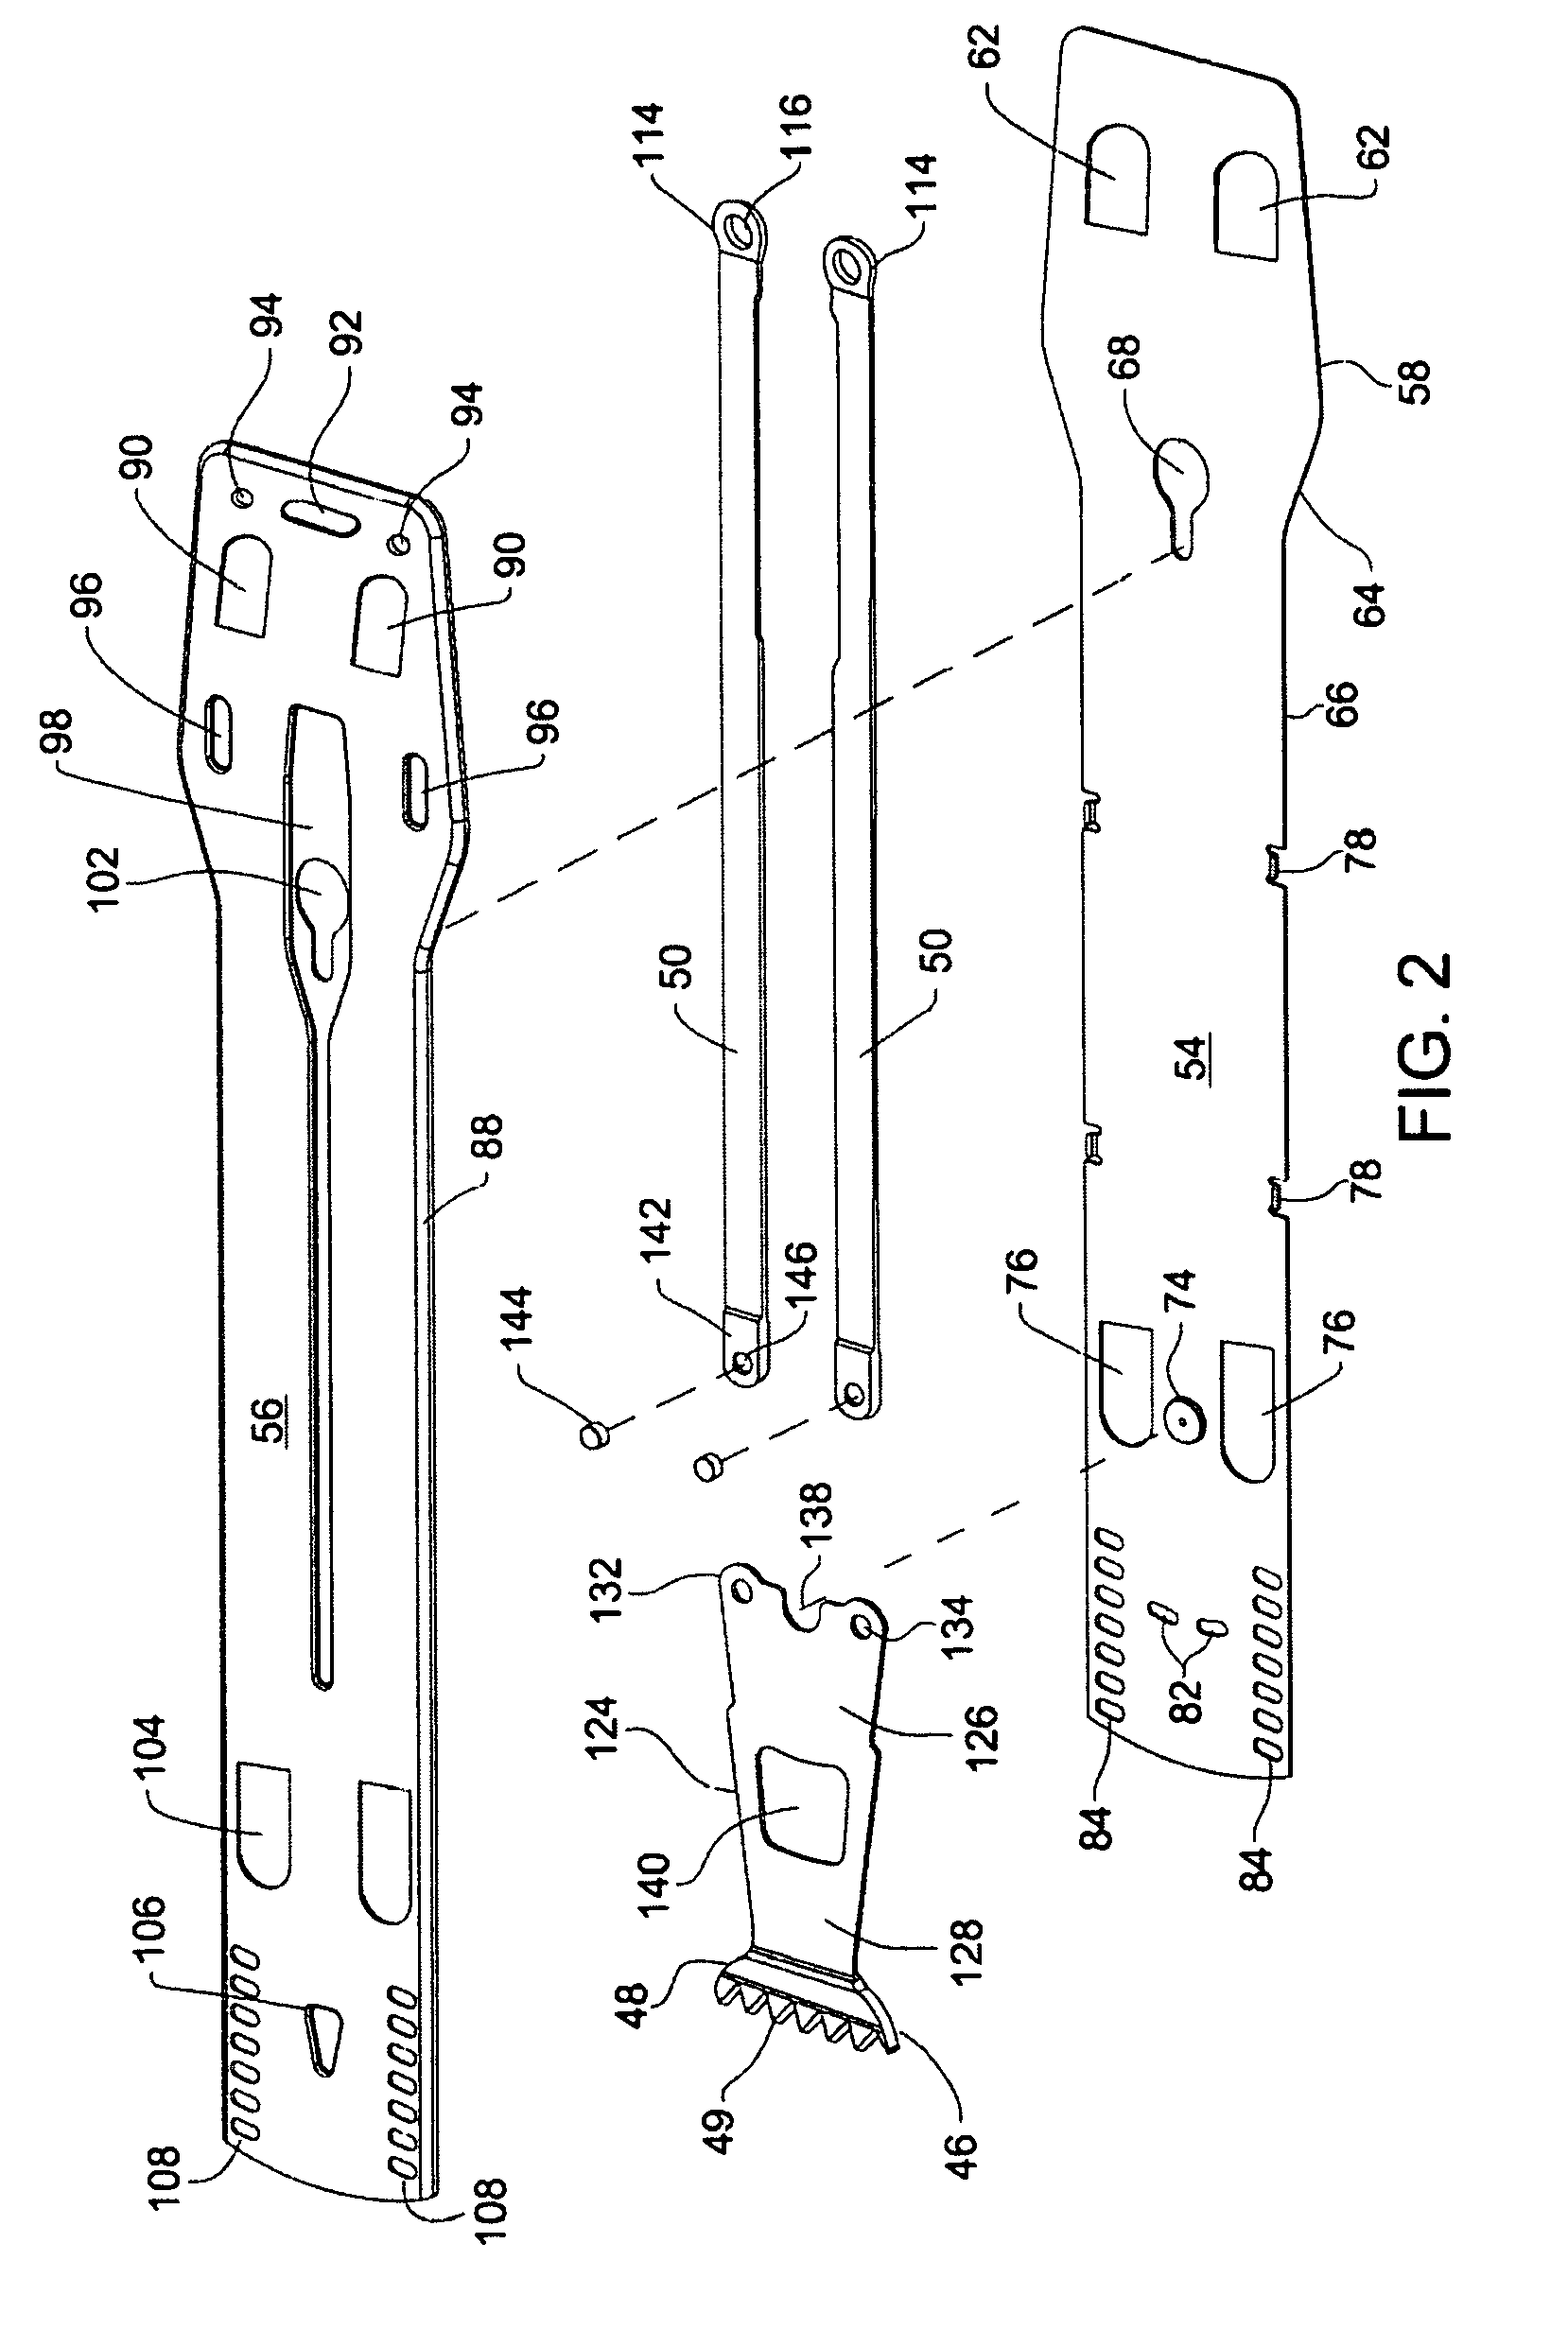 Method for manufacturing a surgical saw blade with a blade head and raised boss around which the blade head pivots